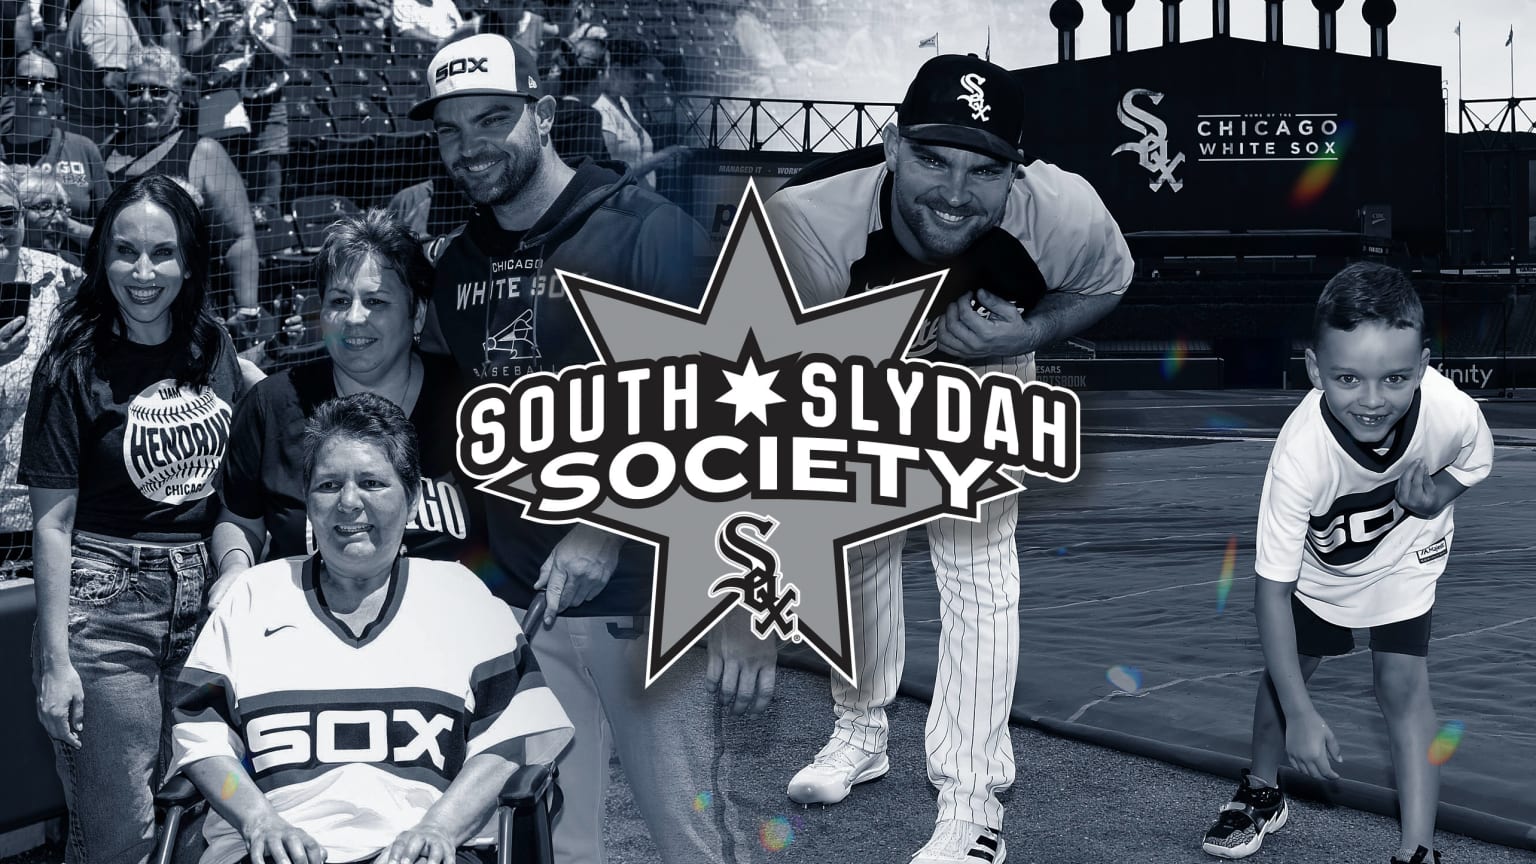 White Sox Player Programs and Community Outreach